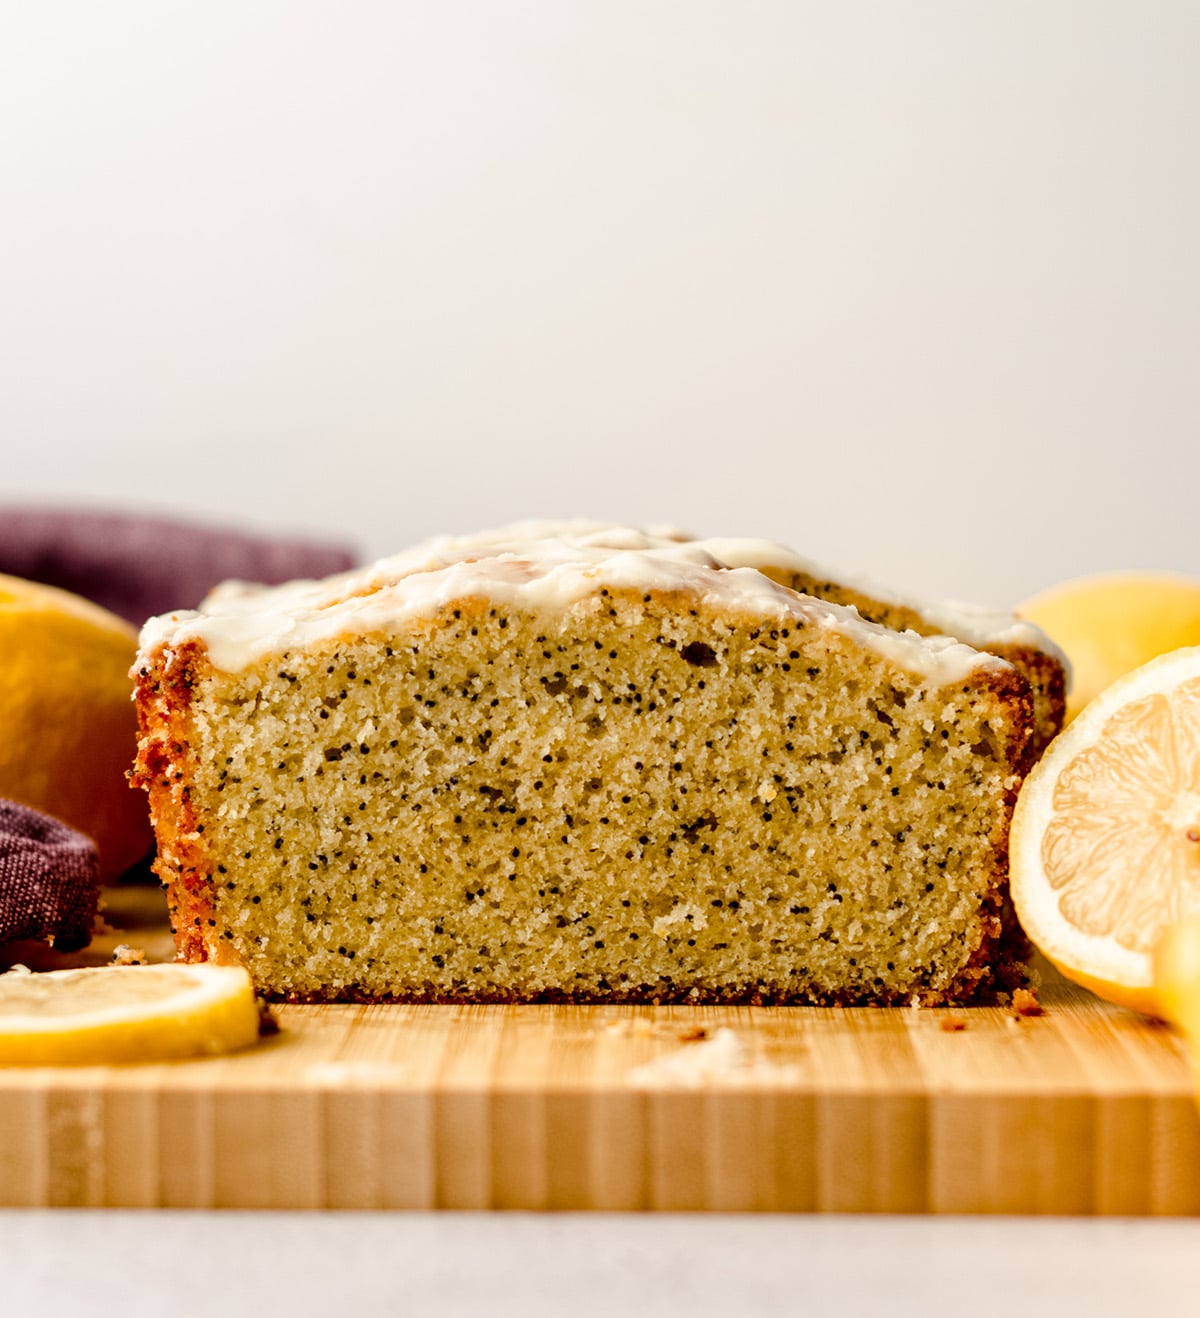 A front view of a loaf of lemon poppy seed bread on a cutting board, topped with glaze.